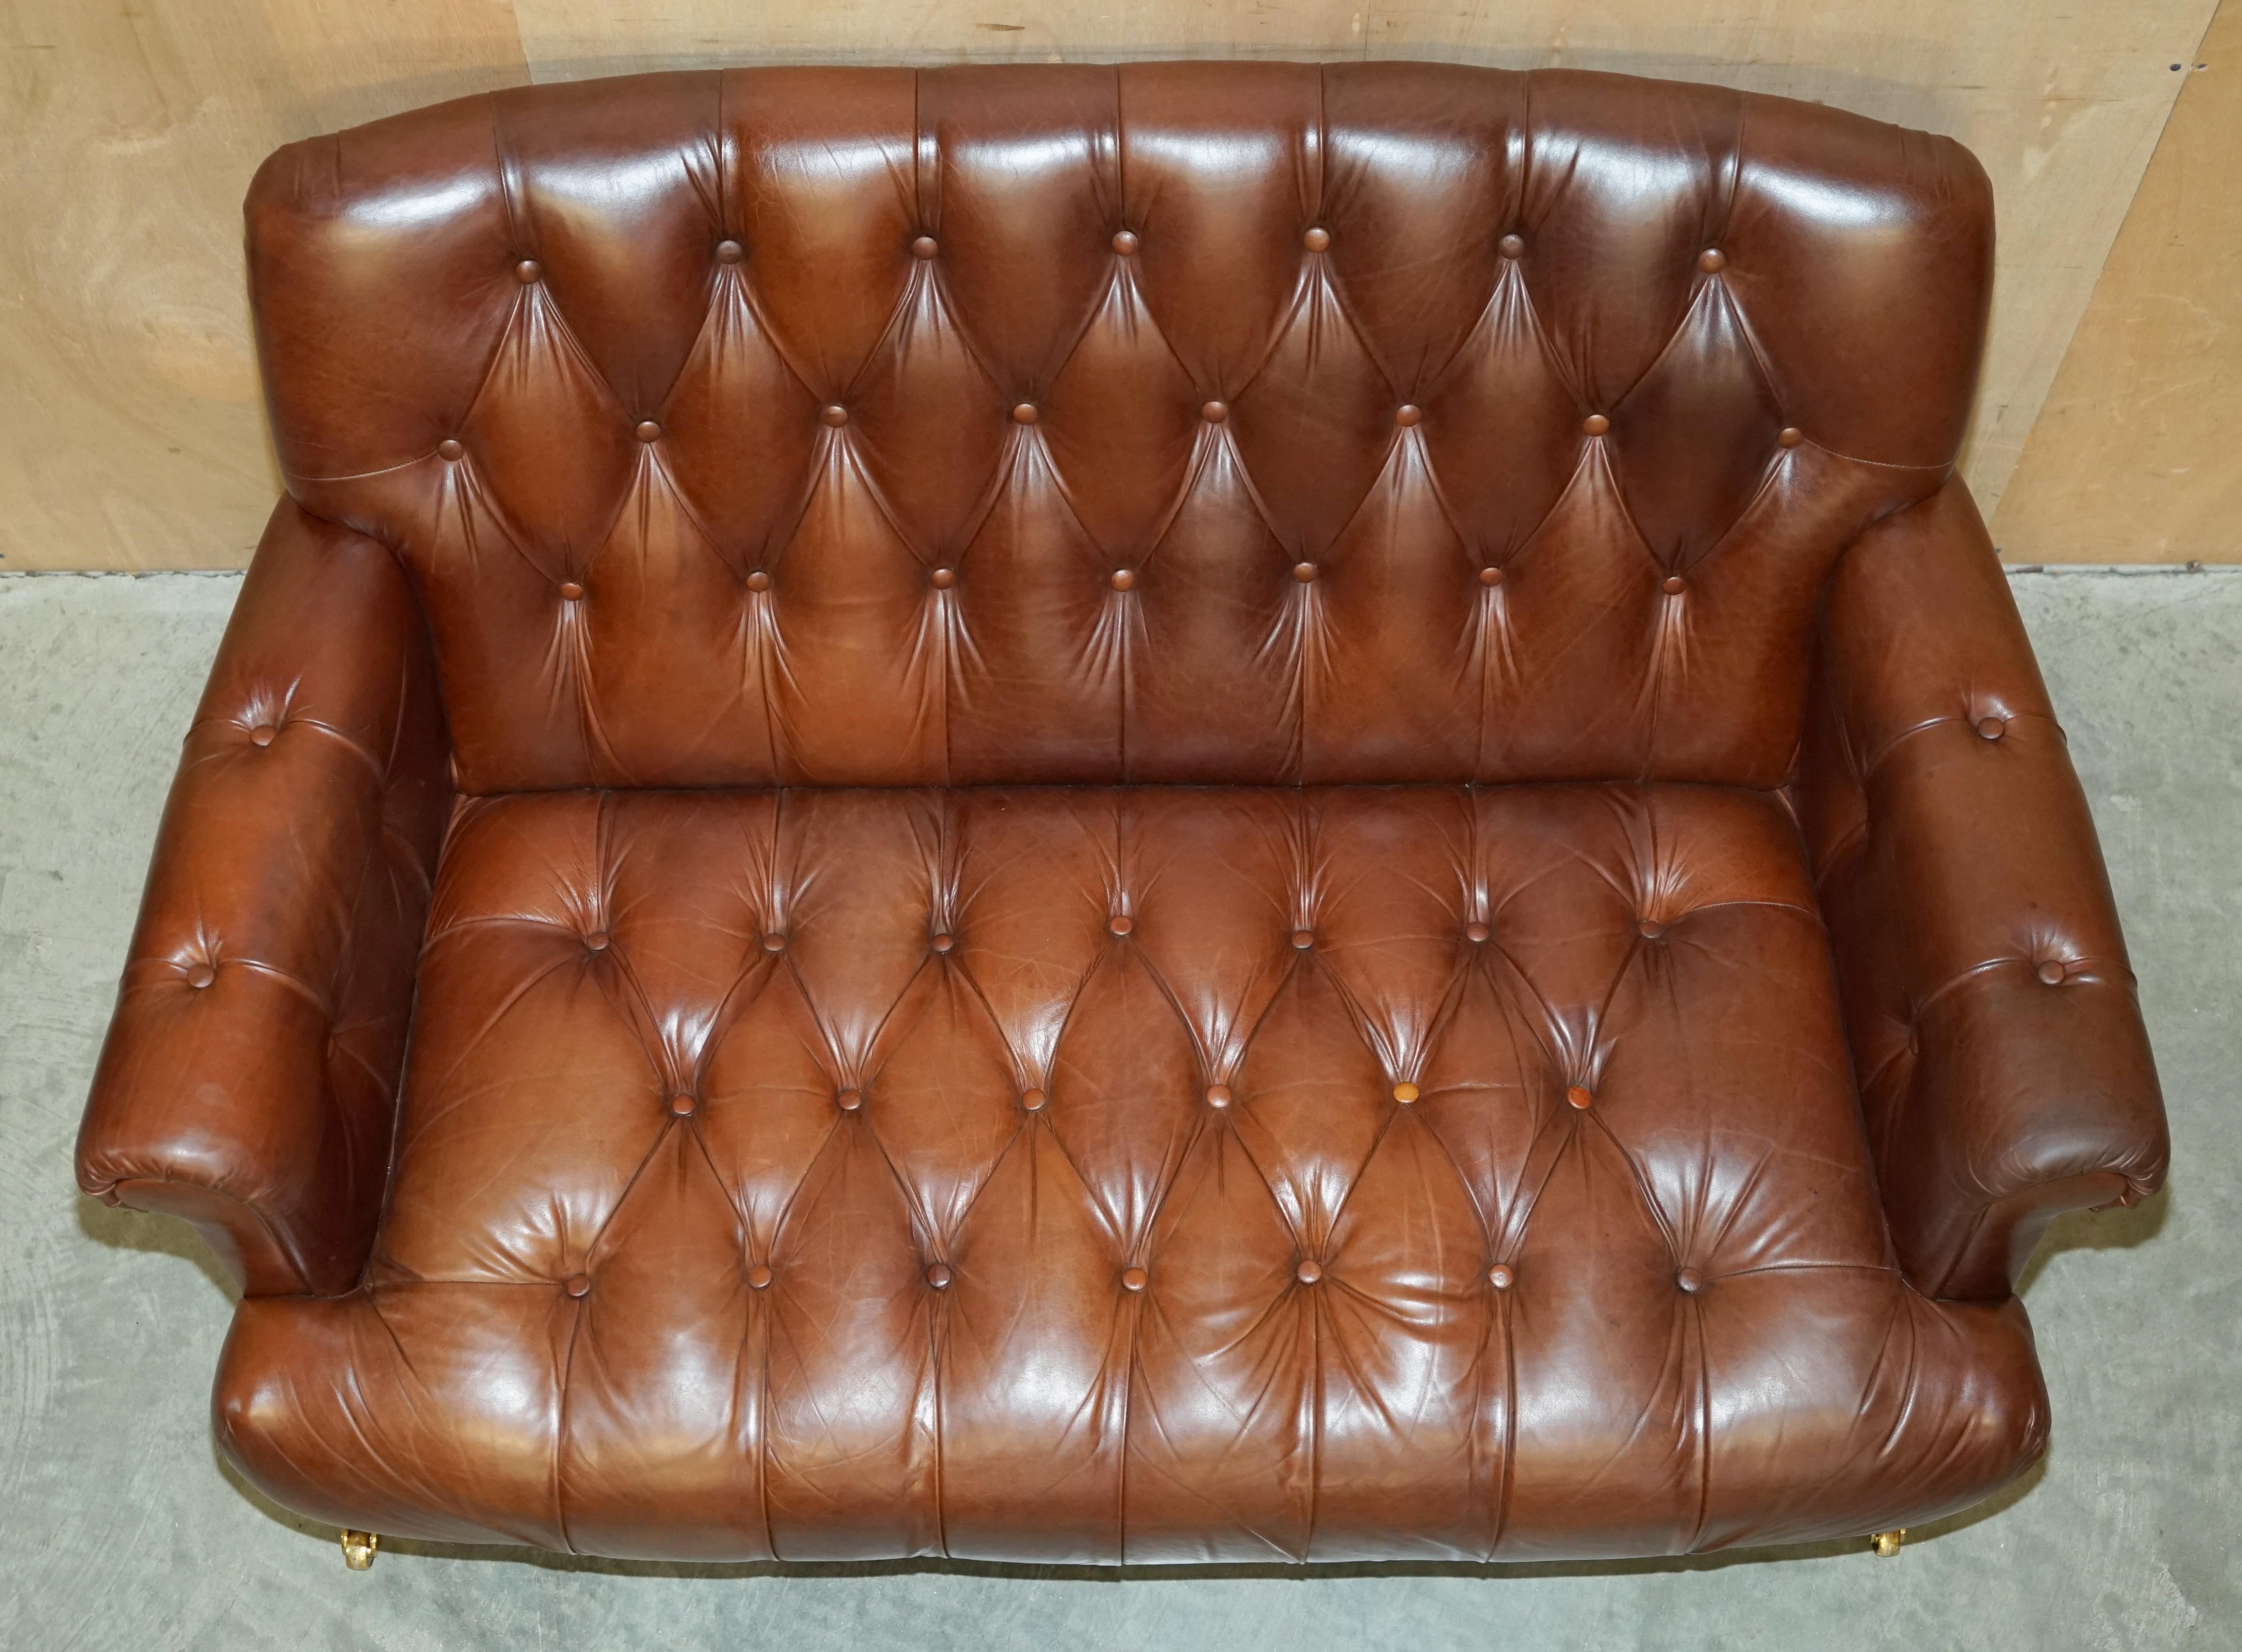 FiNE CHESTNUT BROWN LEATHER LAUREN ASHLEY CHESTERFIELD TWO SEAT LIBRARY SOFa im Angebot 8